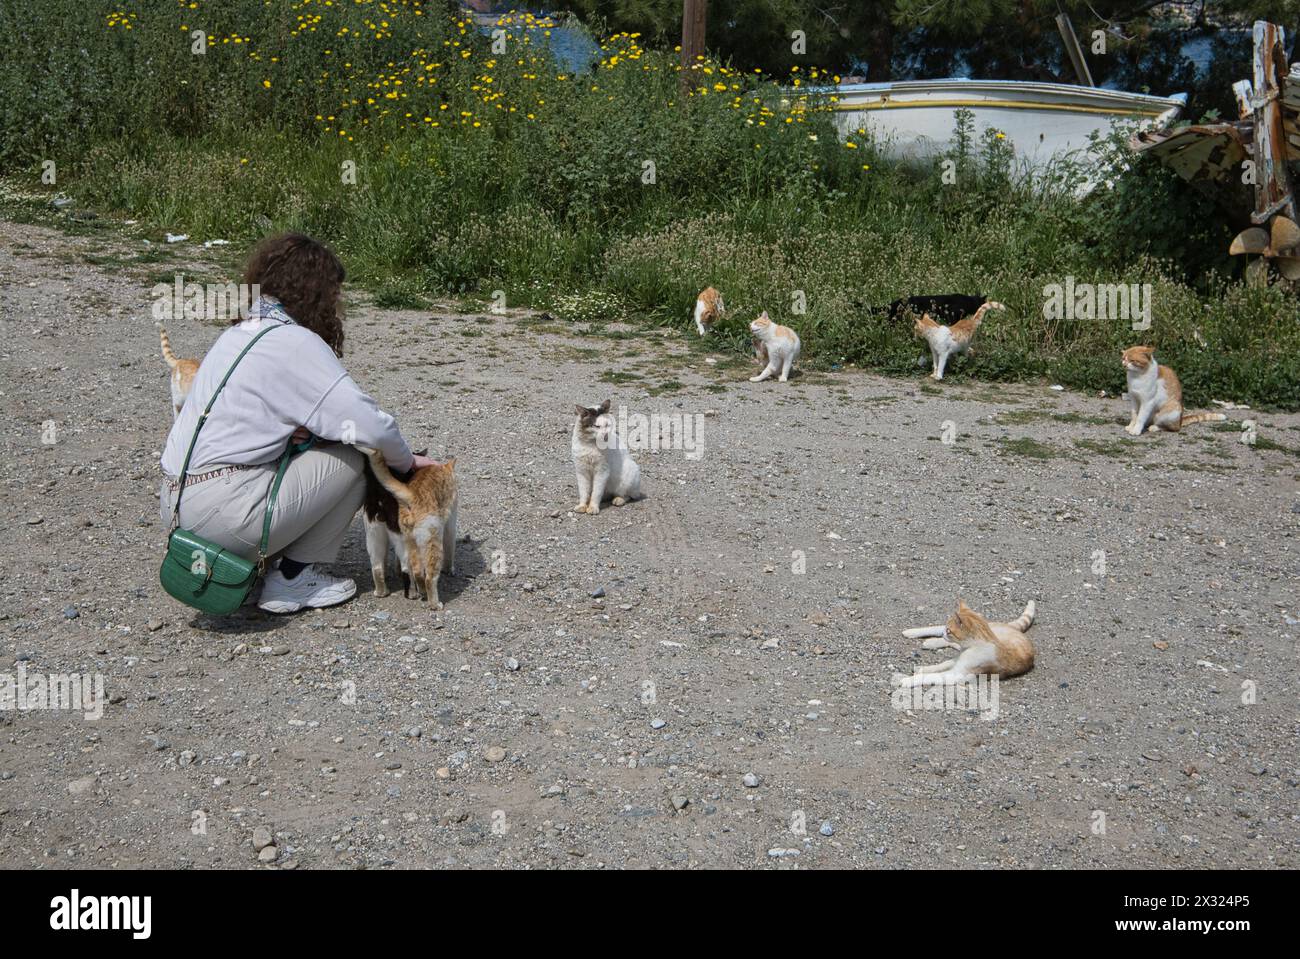 A young female tourists strokes a clowder of feral cats in the town of Gytheio, Greece Stock Photo